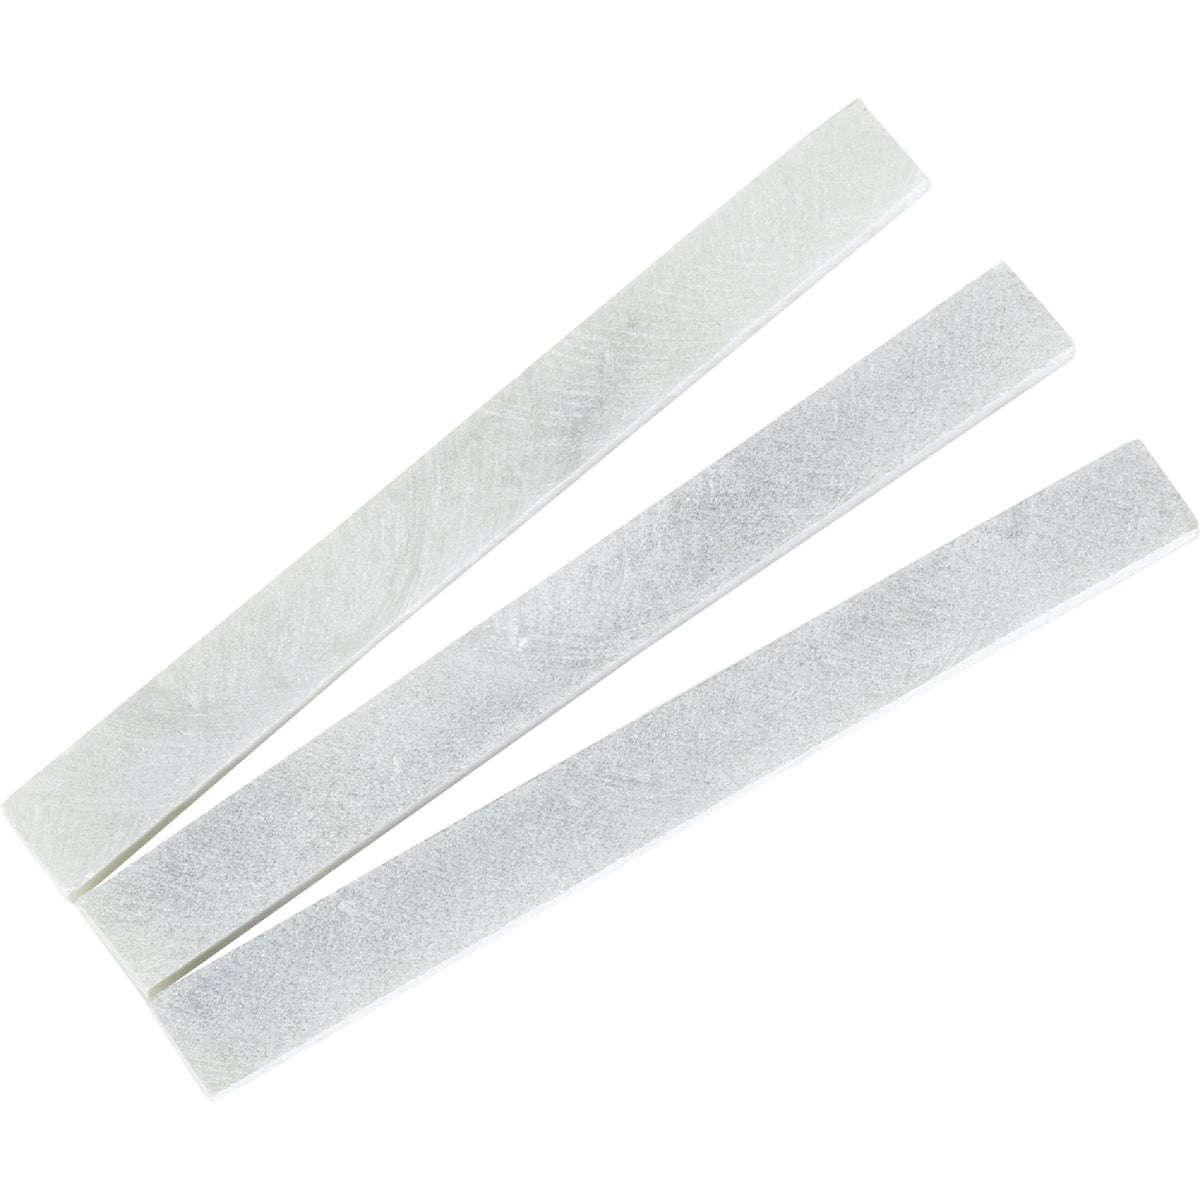 Forney Flat Soapstone (3 Pack)